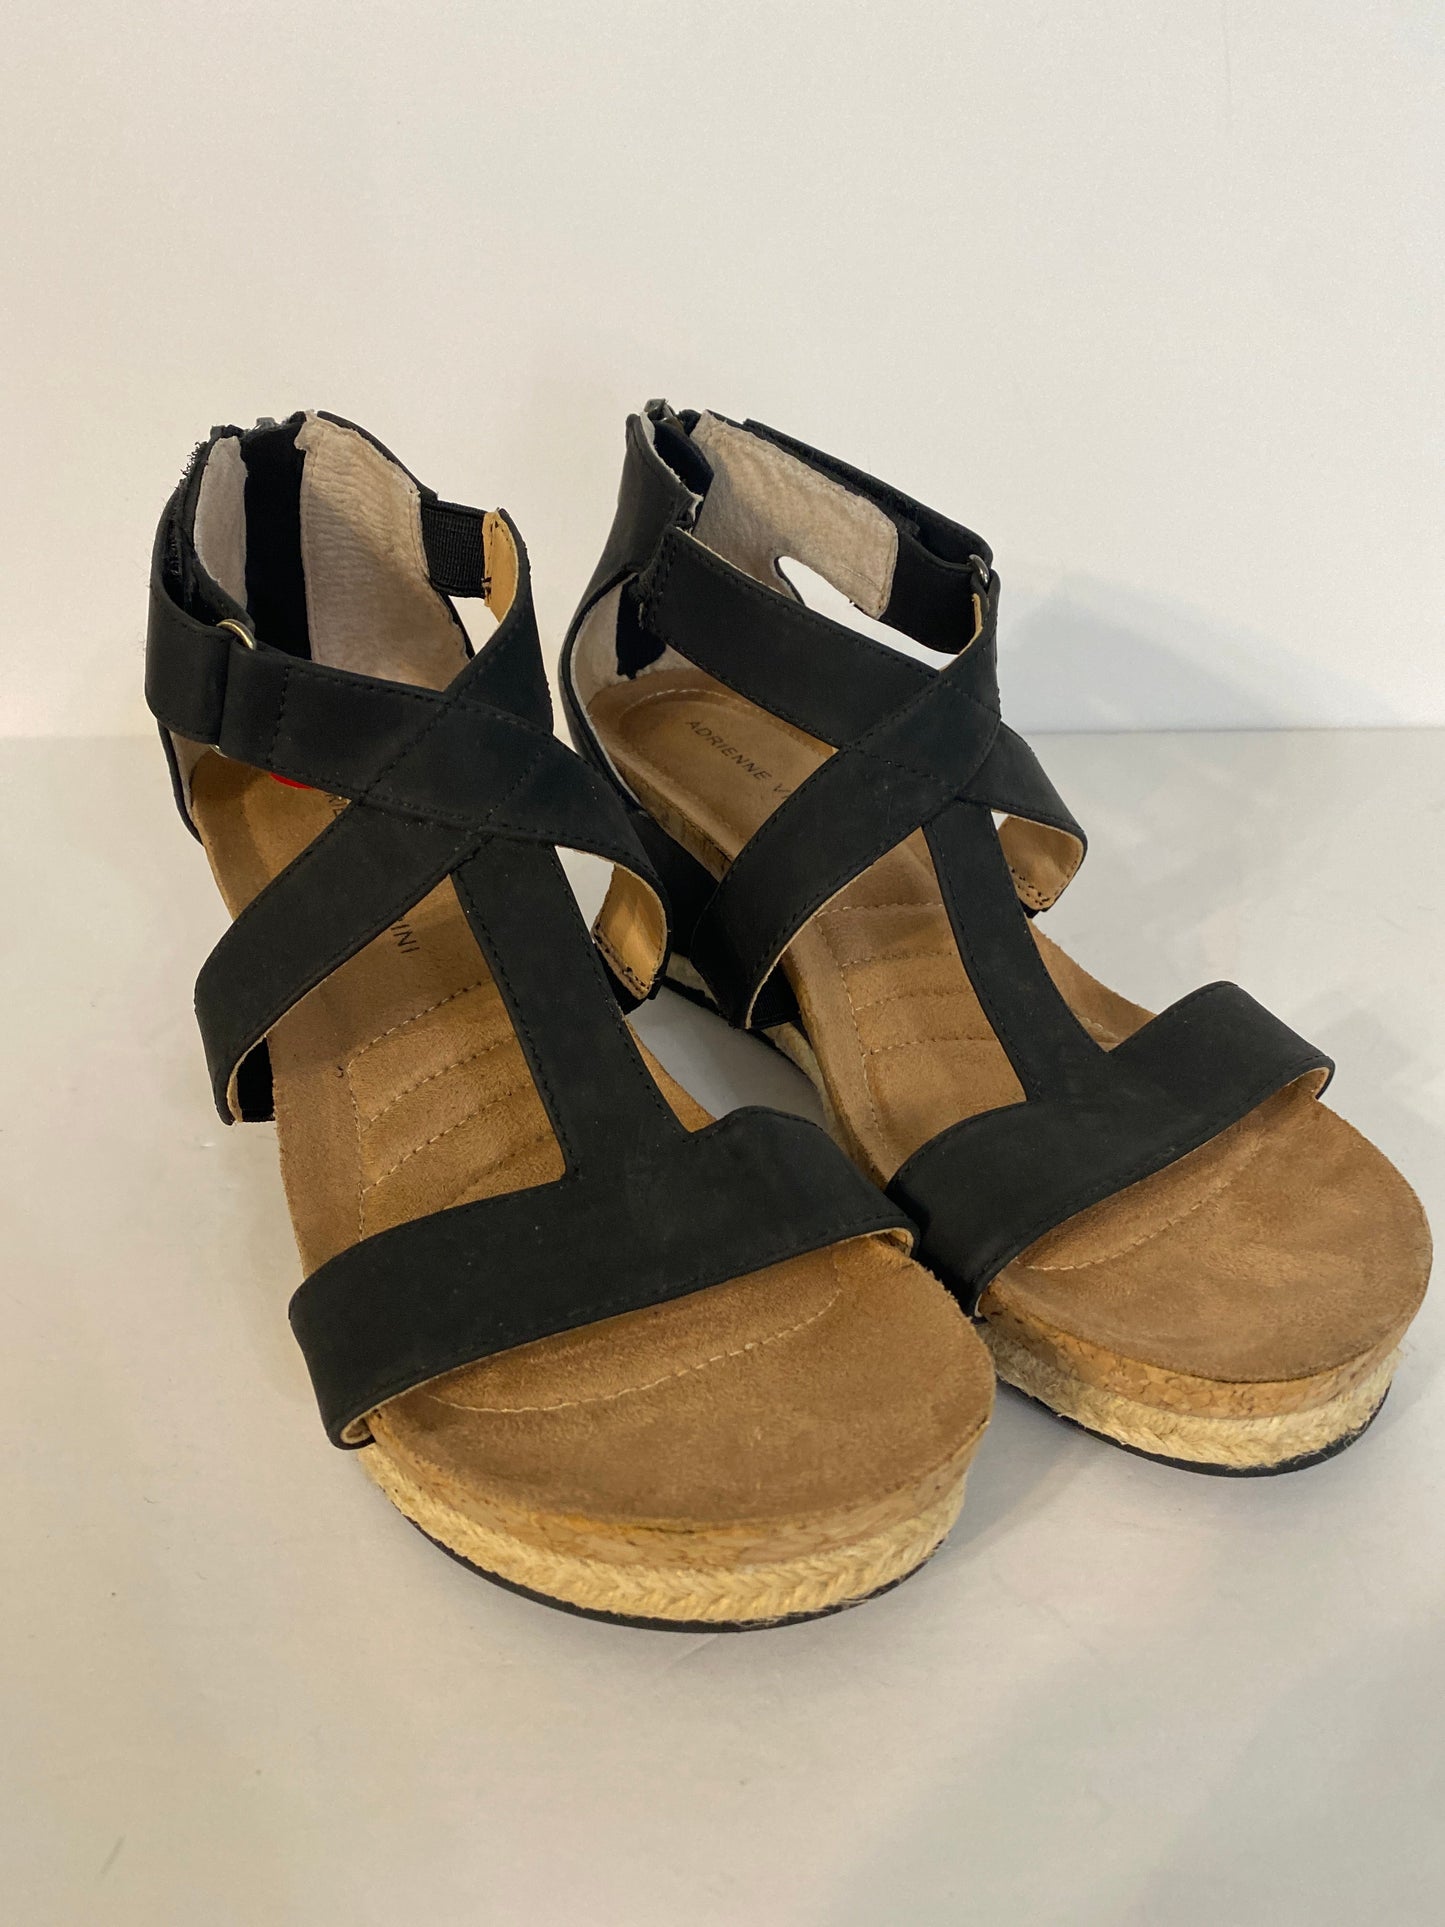 Sandals Heels Wedge By Adrienne Vittadini  Size: 6.5